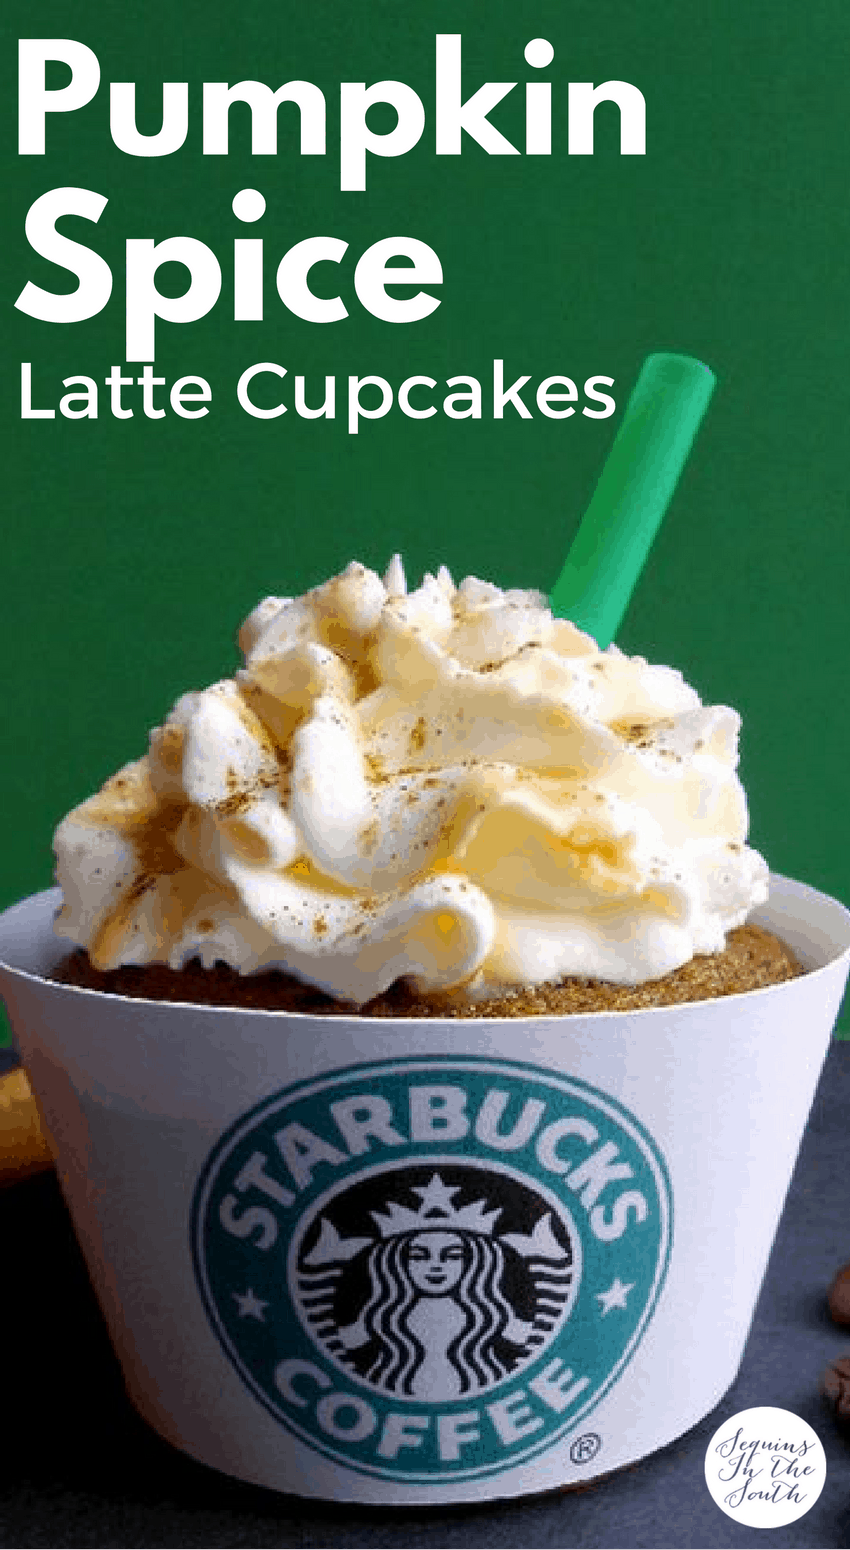 Pumpkin Spice Latte Cupcake in a starbucks coffee wrapper on a green background with title text reading Pumpkin Spice Latte Cupcakes